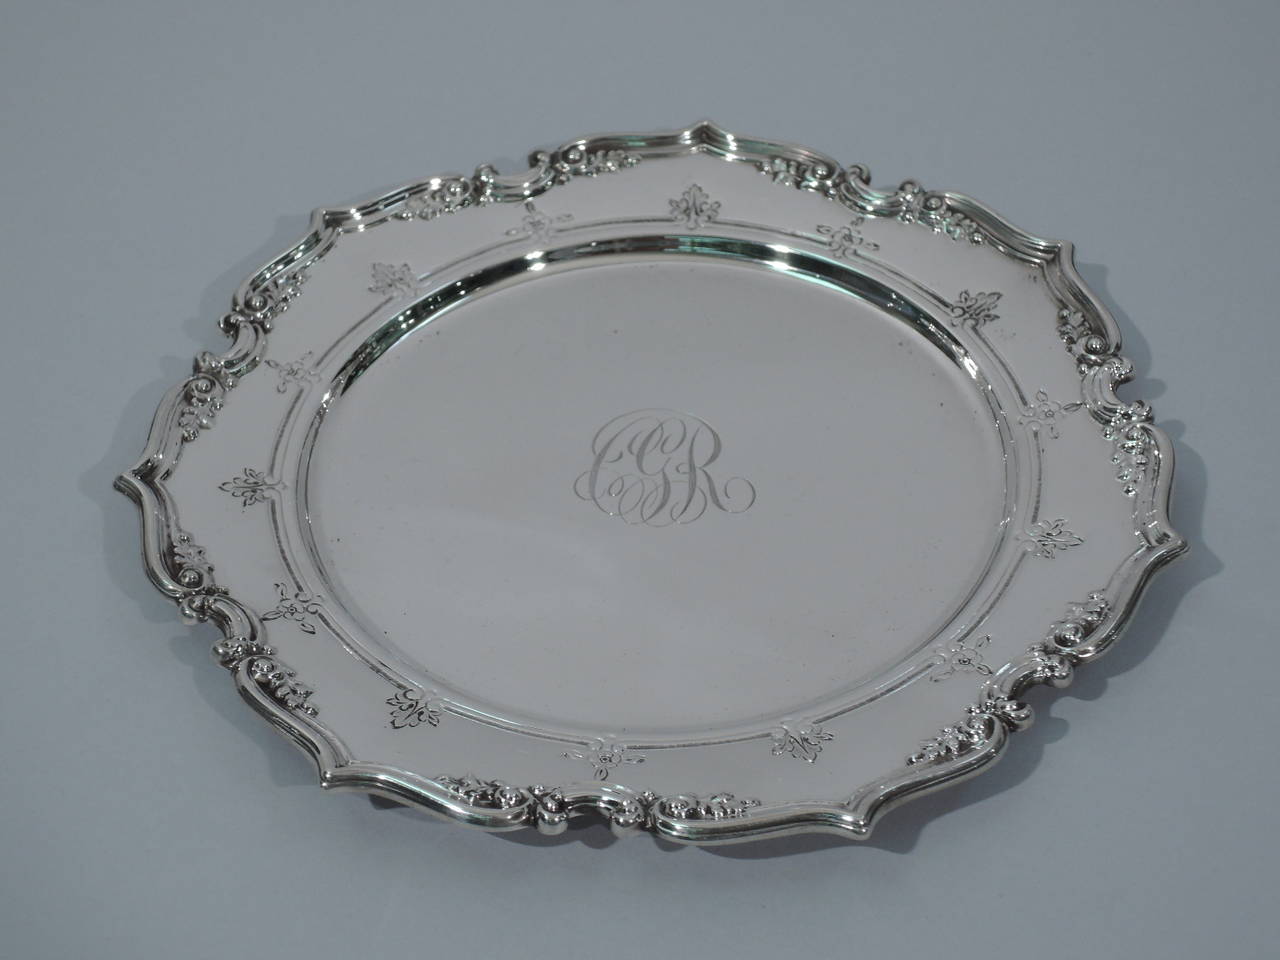 Set of 12 Gorham Sterling Silver Bread and Butter Plates with Fancy Scrolls 3